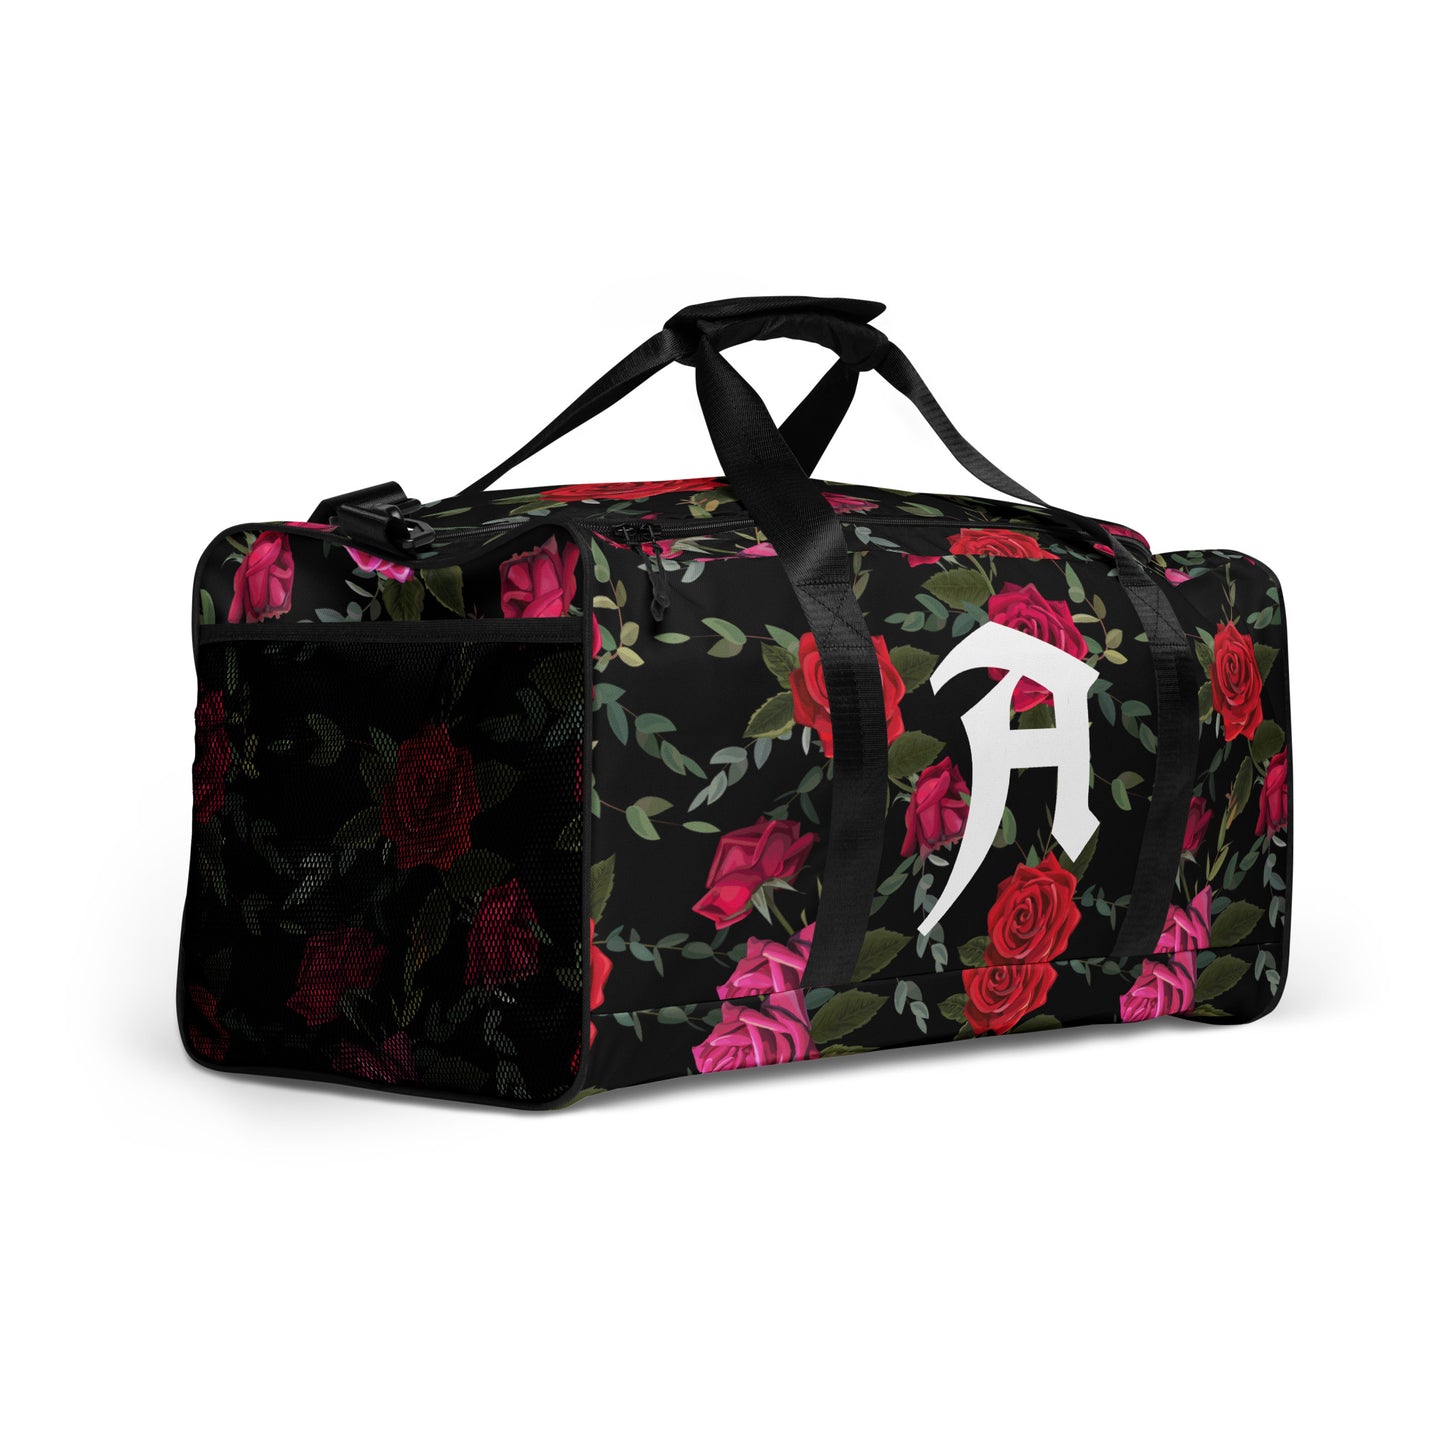 Personalized Monogrammed Duffle Bag in Floral Design